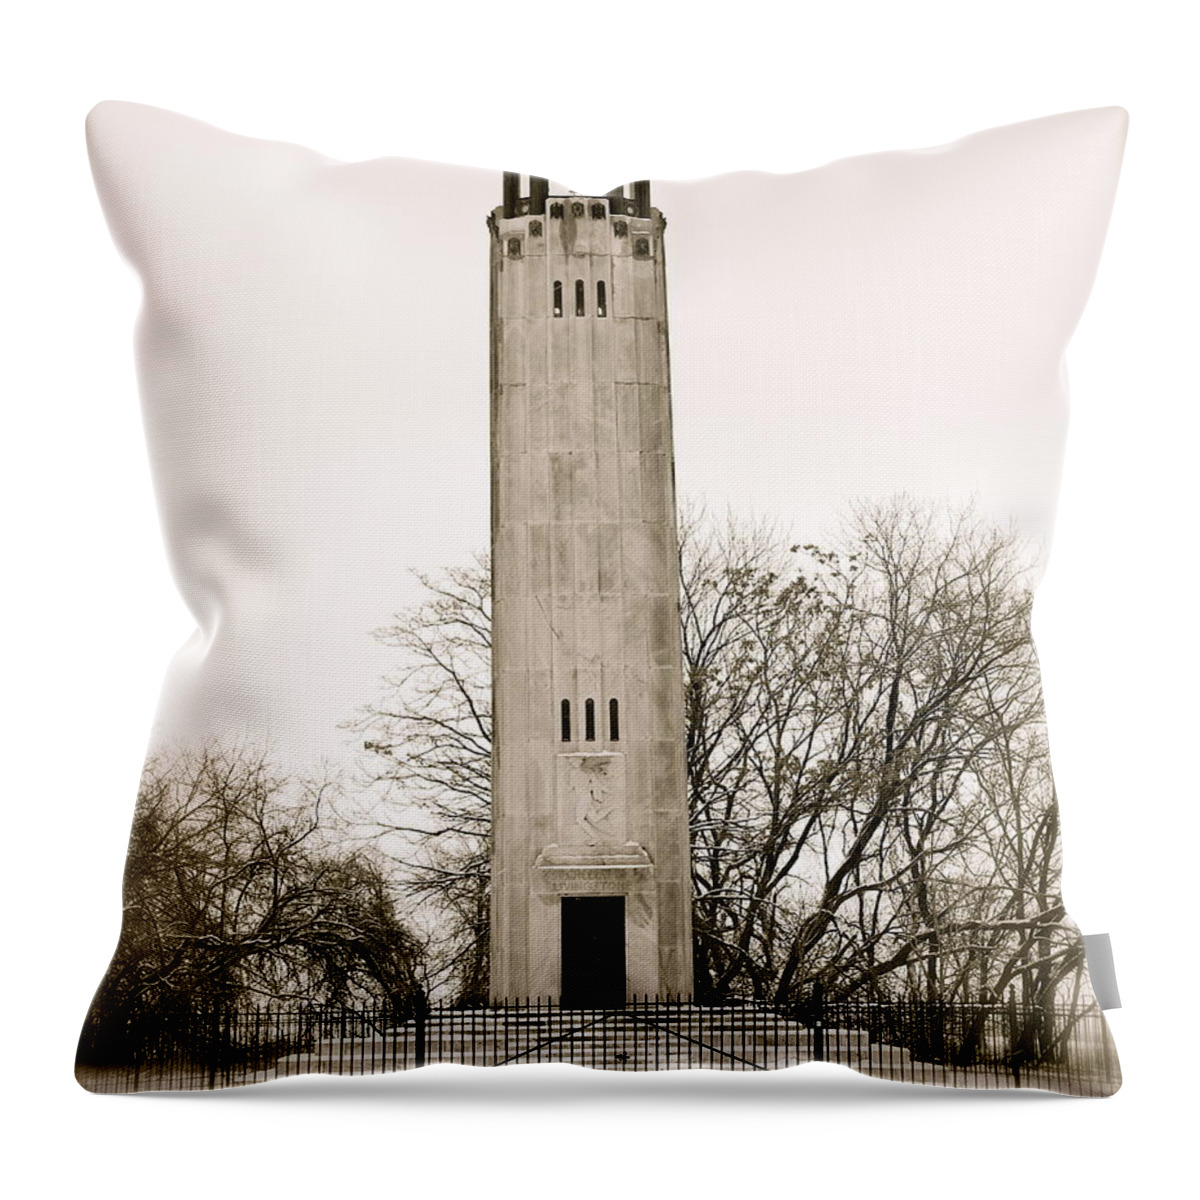 Lighthouse Throw Pillow featuring the photograph Belle Ilse Light by Michael Peychich